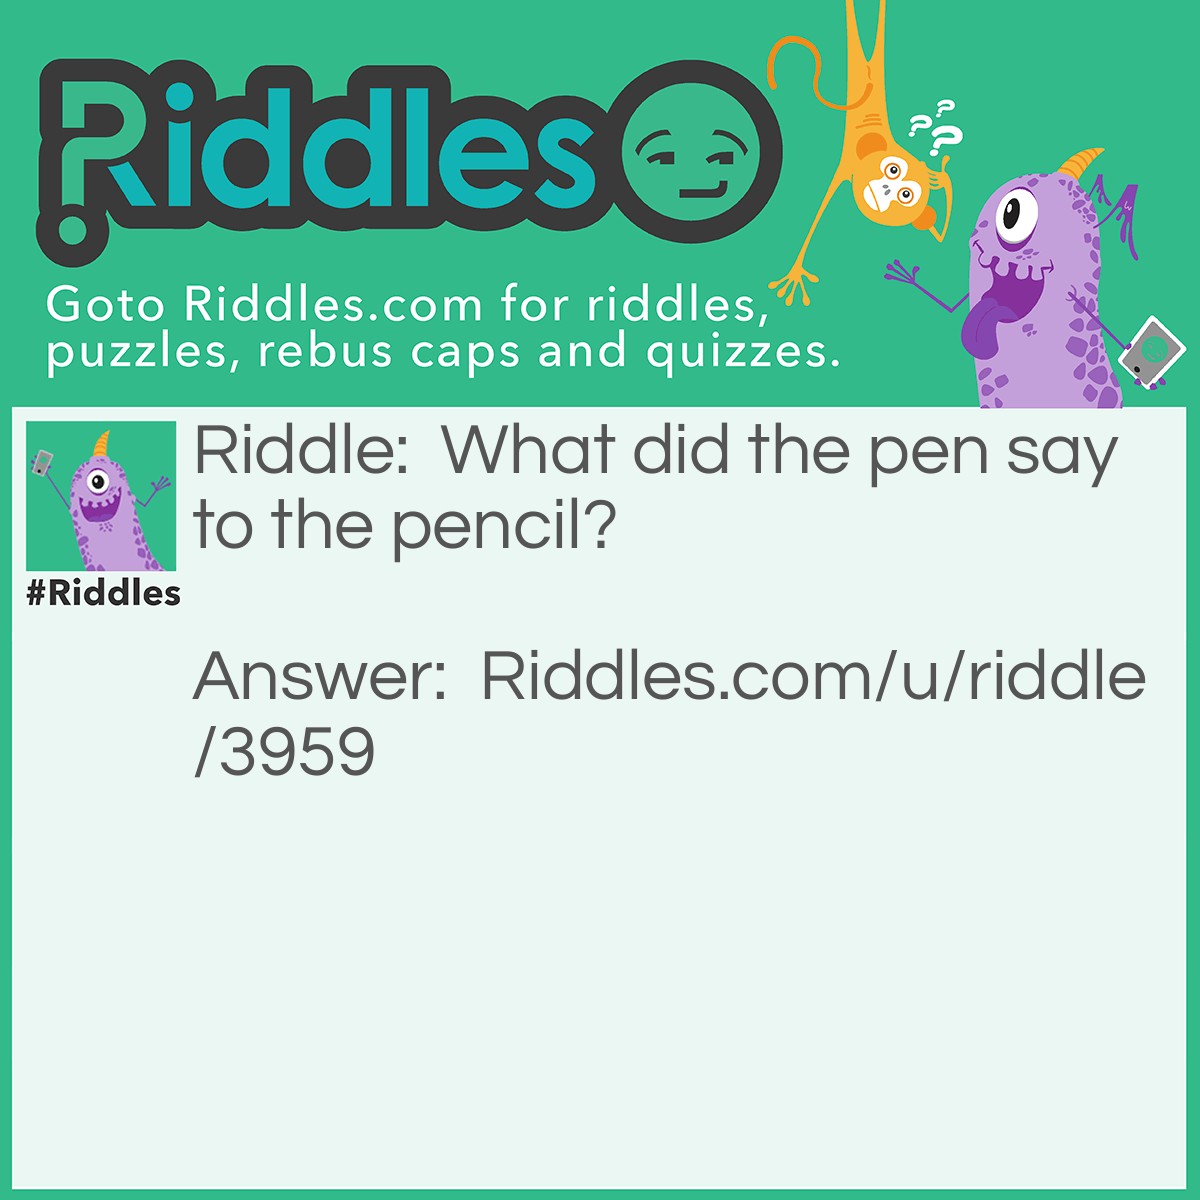 Riddle: What did the pen say to the pencil? Answer: You're looking sharp.